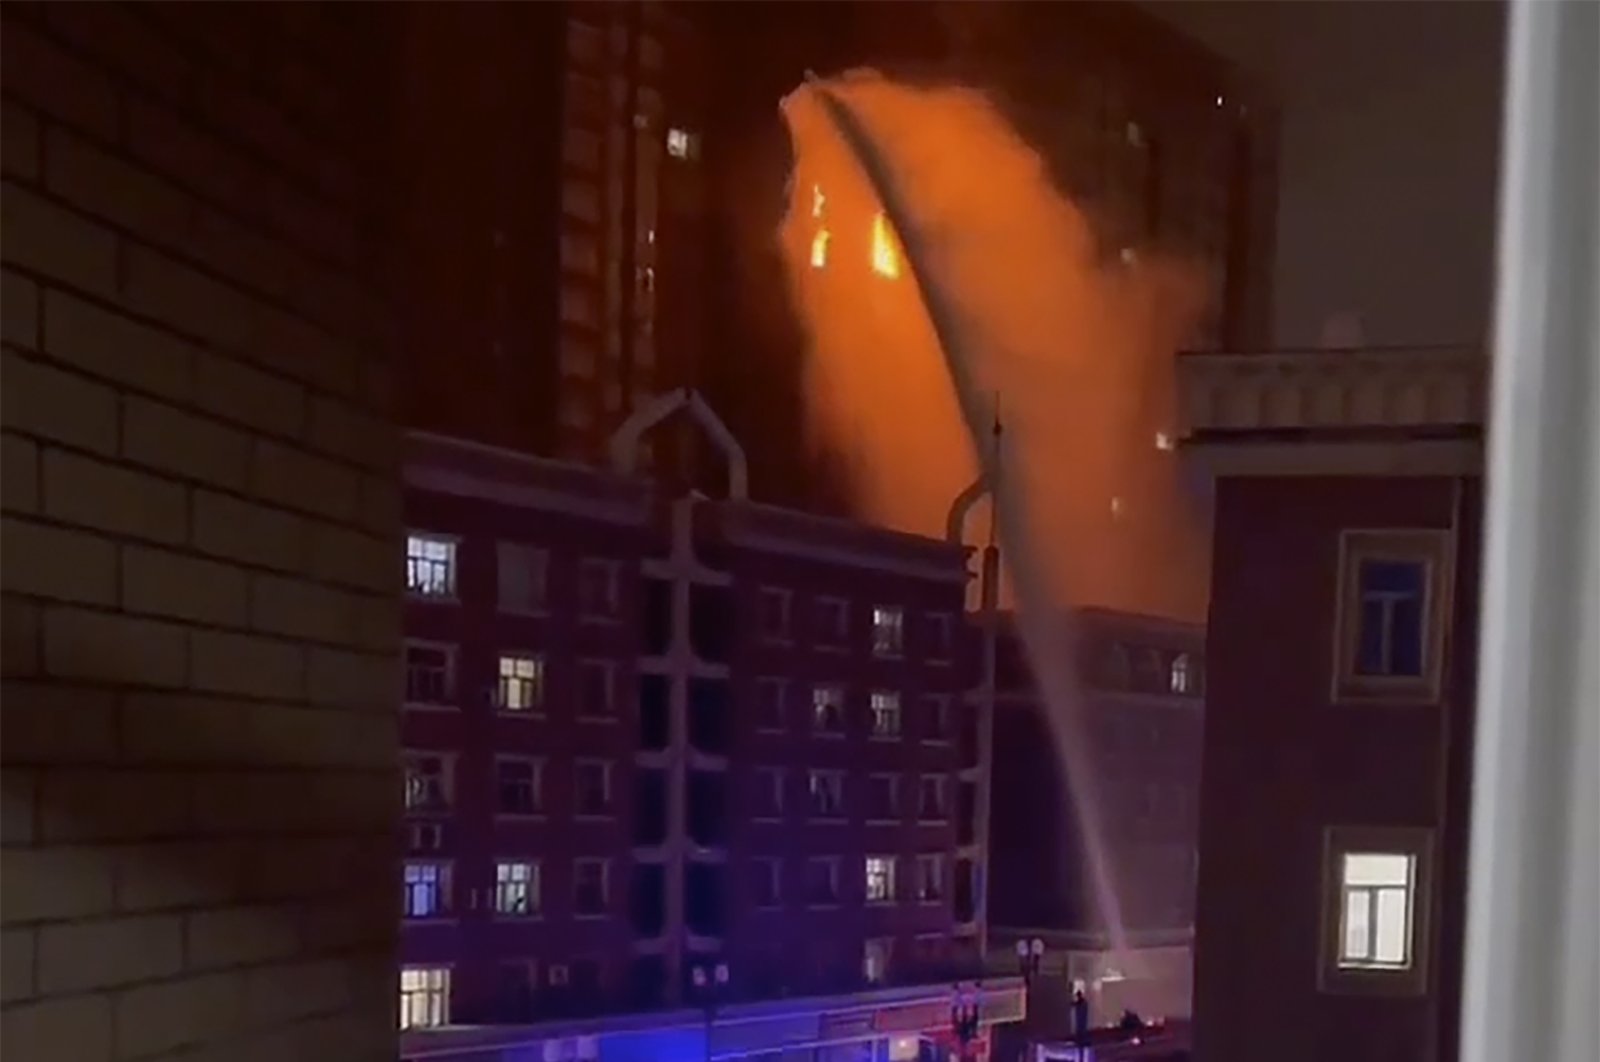 Firefighters spray water on a fire at a residential building in Urumqi, Xinjiang, China, Nov. 24, 2022. (AP Photo)